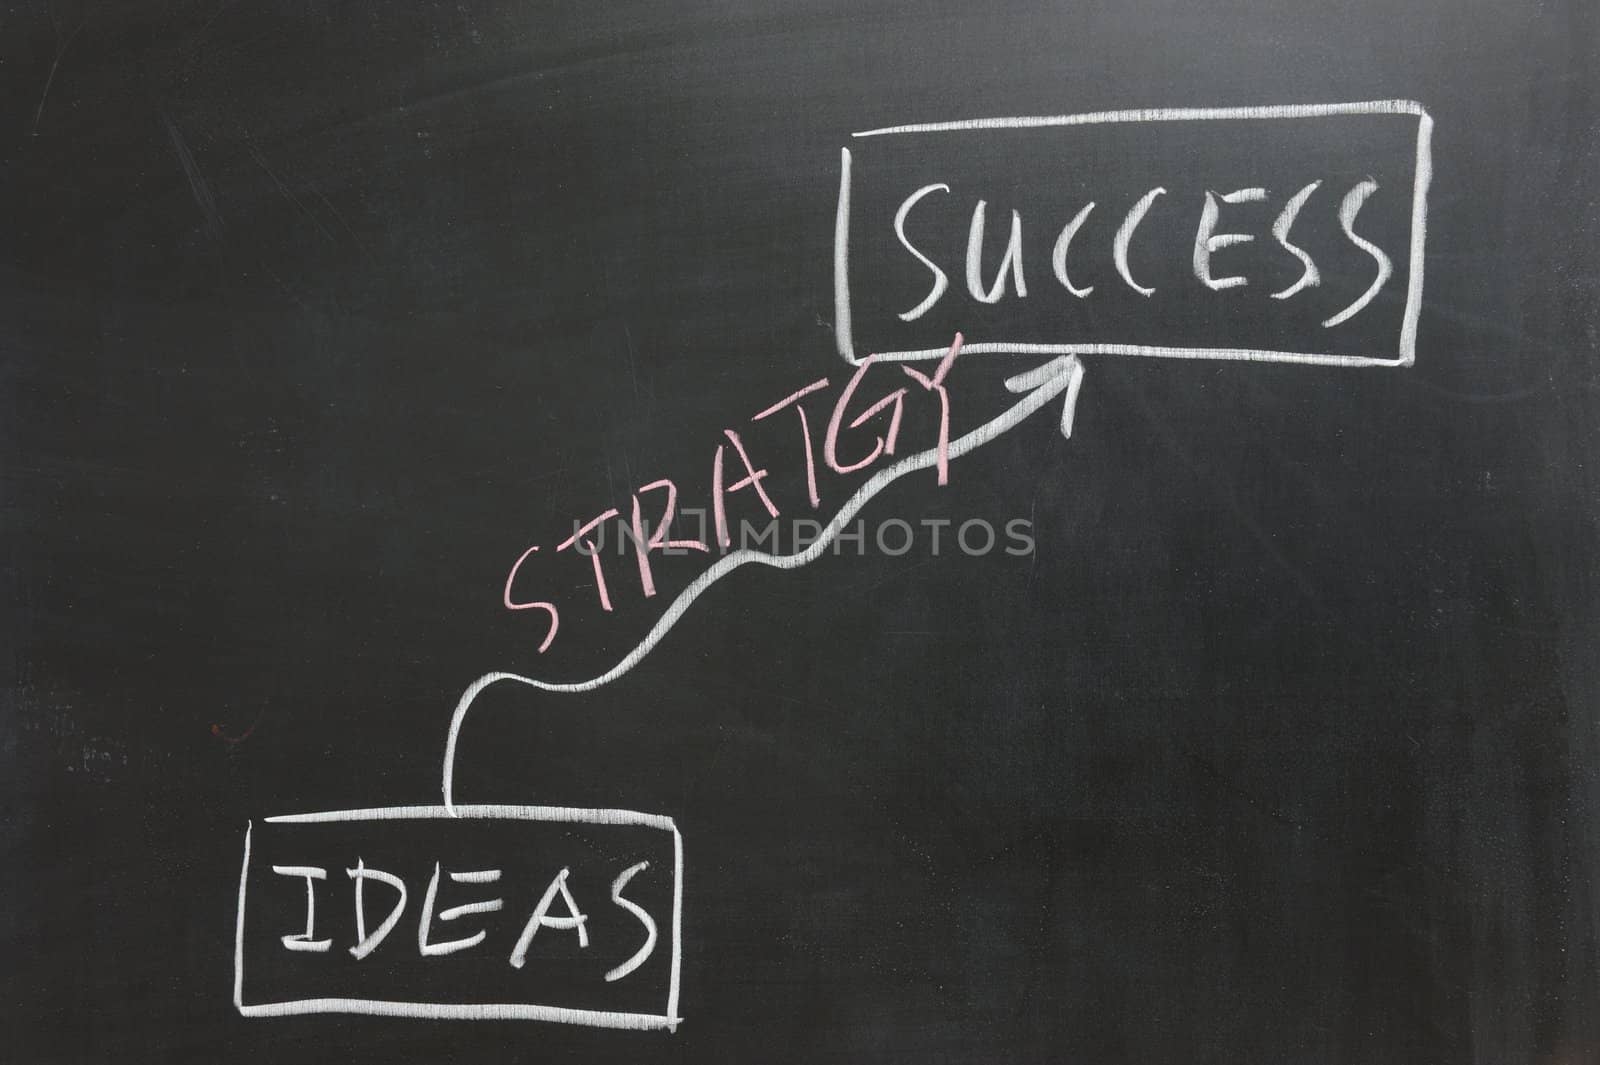 Chalkboard drawing - Turn ideas to Success by proper strategy